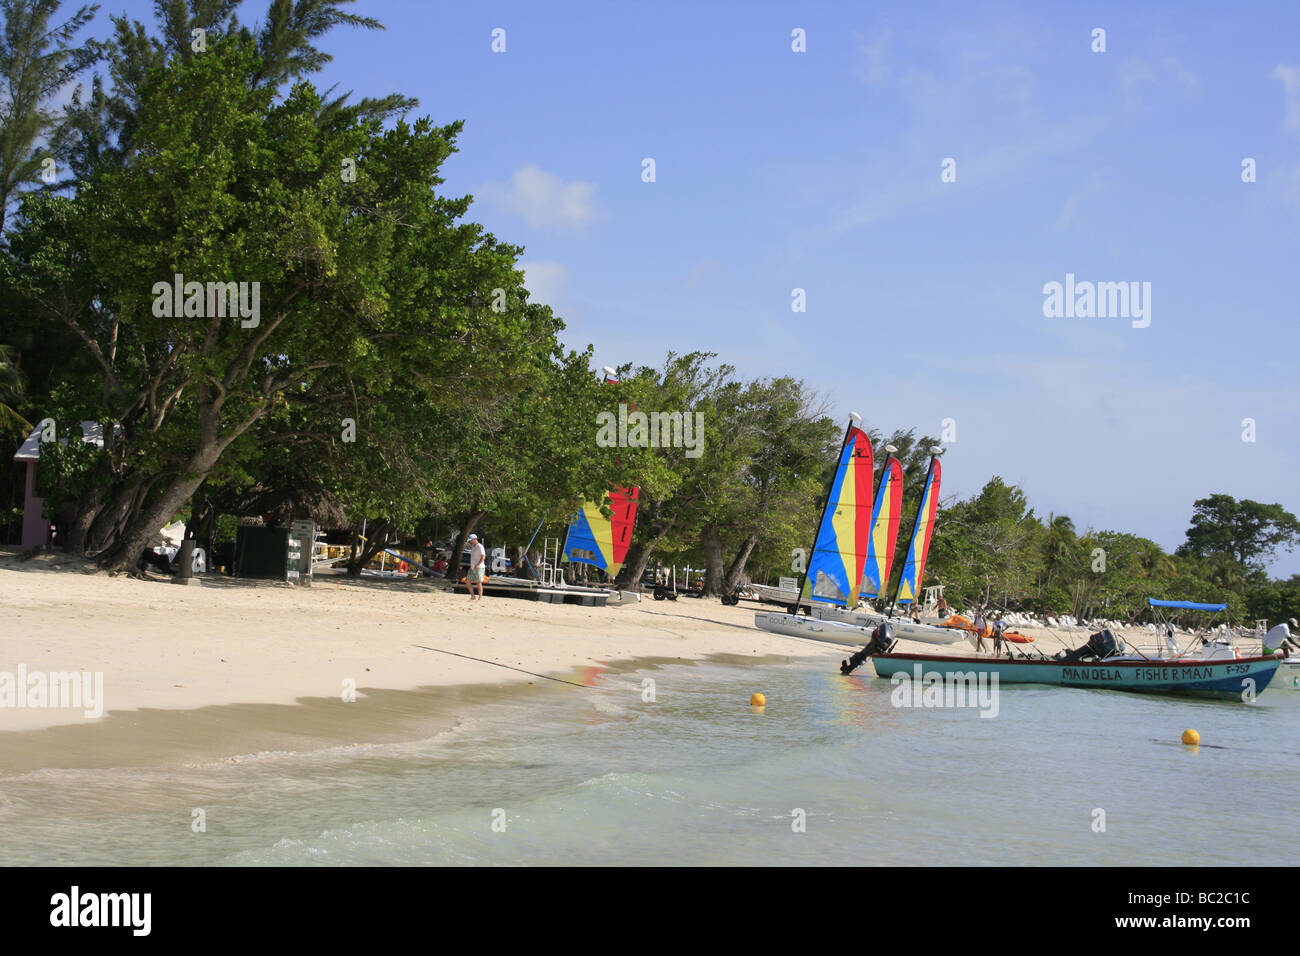 The sandy beach at Bloody Bay in Jamaica Stock Photo